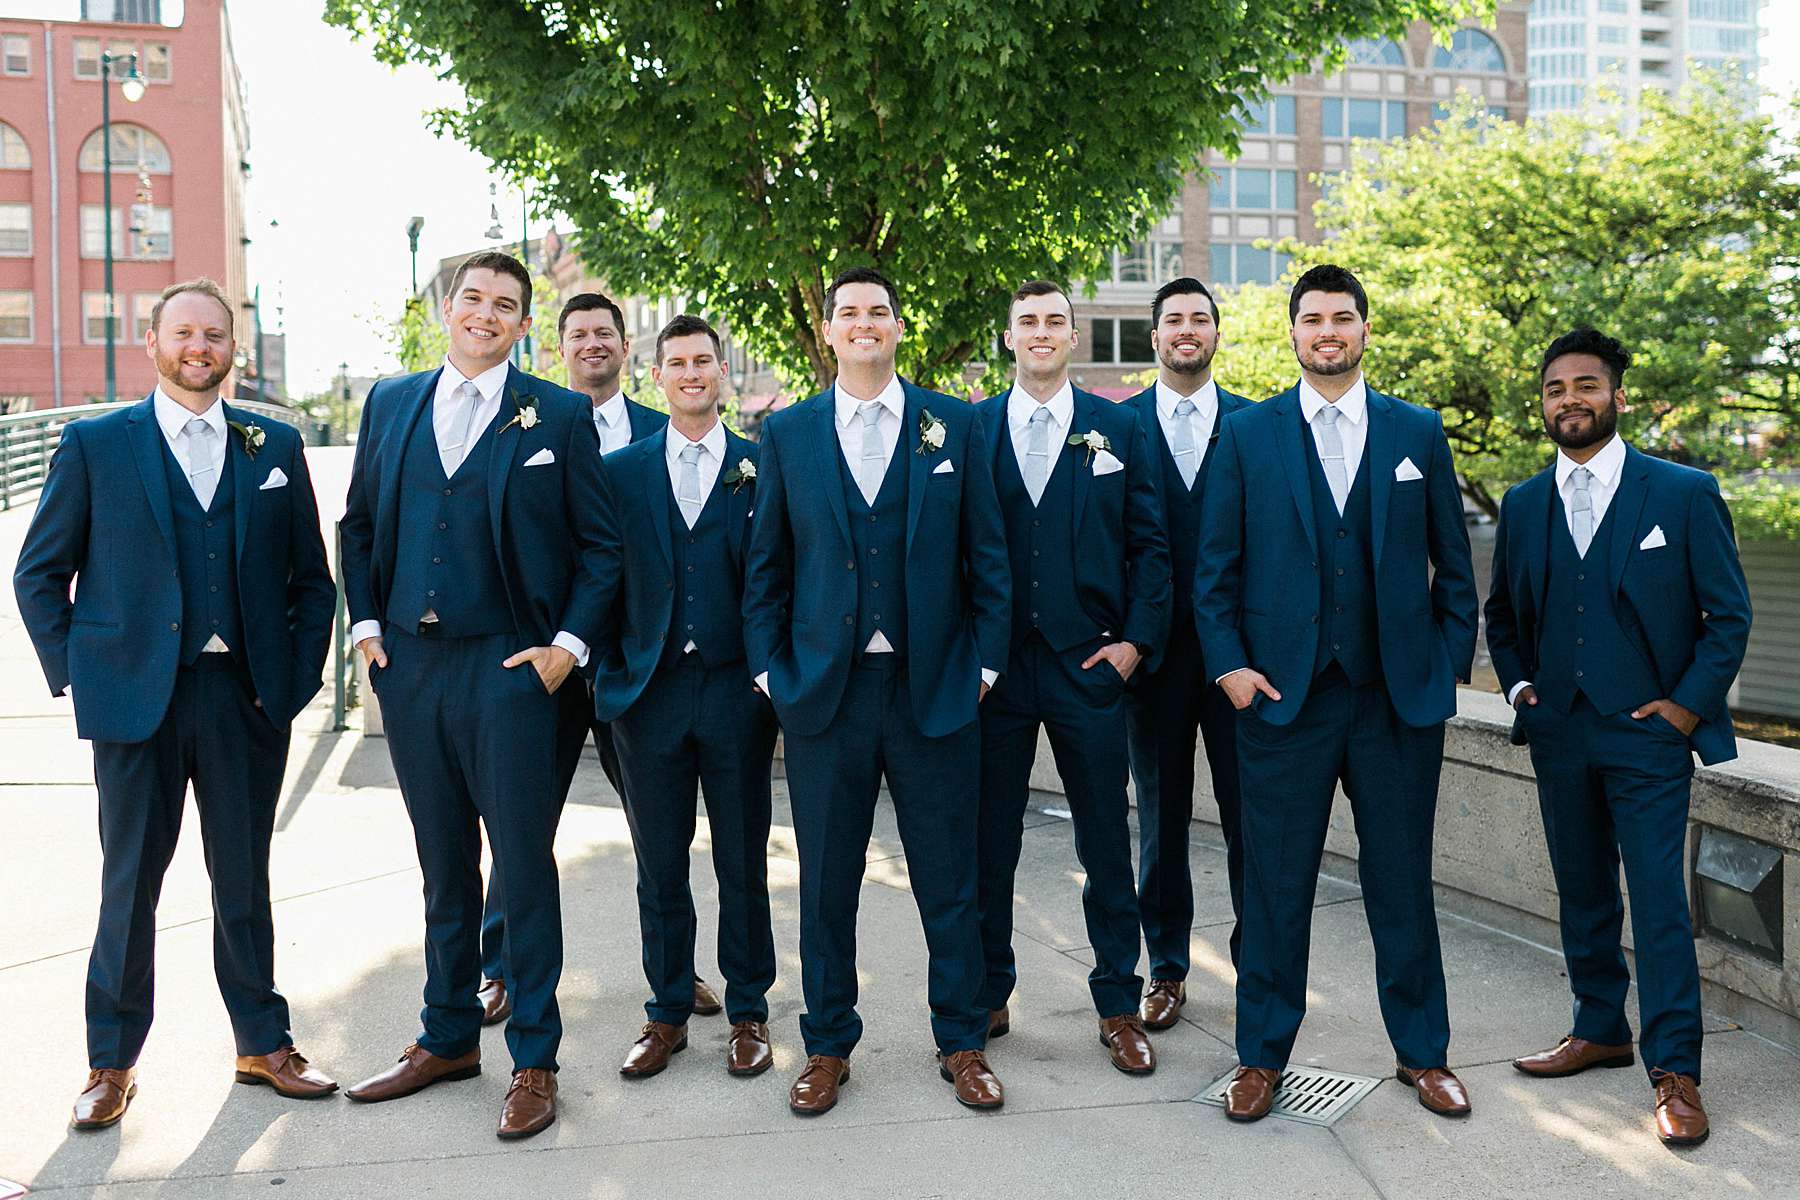 bridal party portraits, romantic wedding at turner hall ballroom downtown milwaukee with milwaukee flower company, photo by laurelyn savannah photography